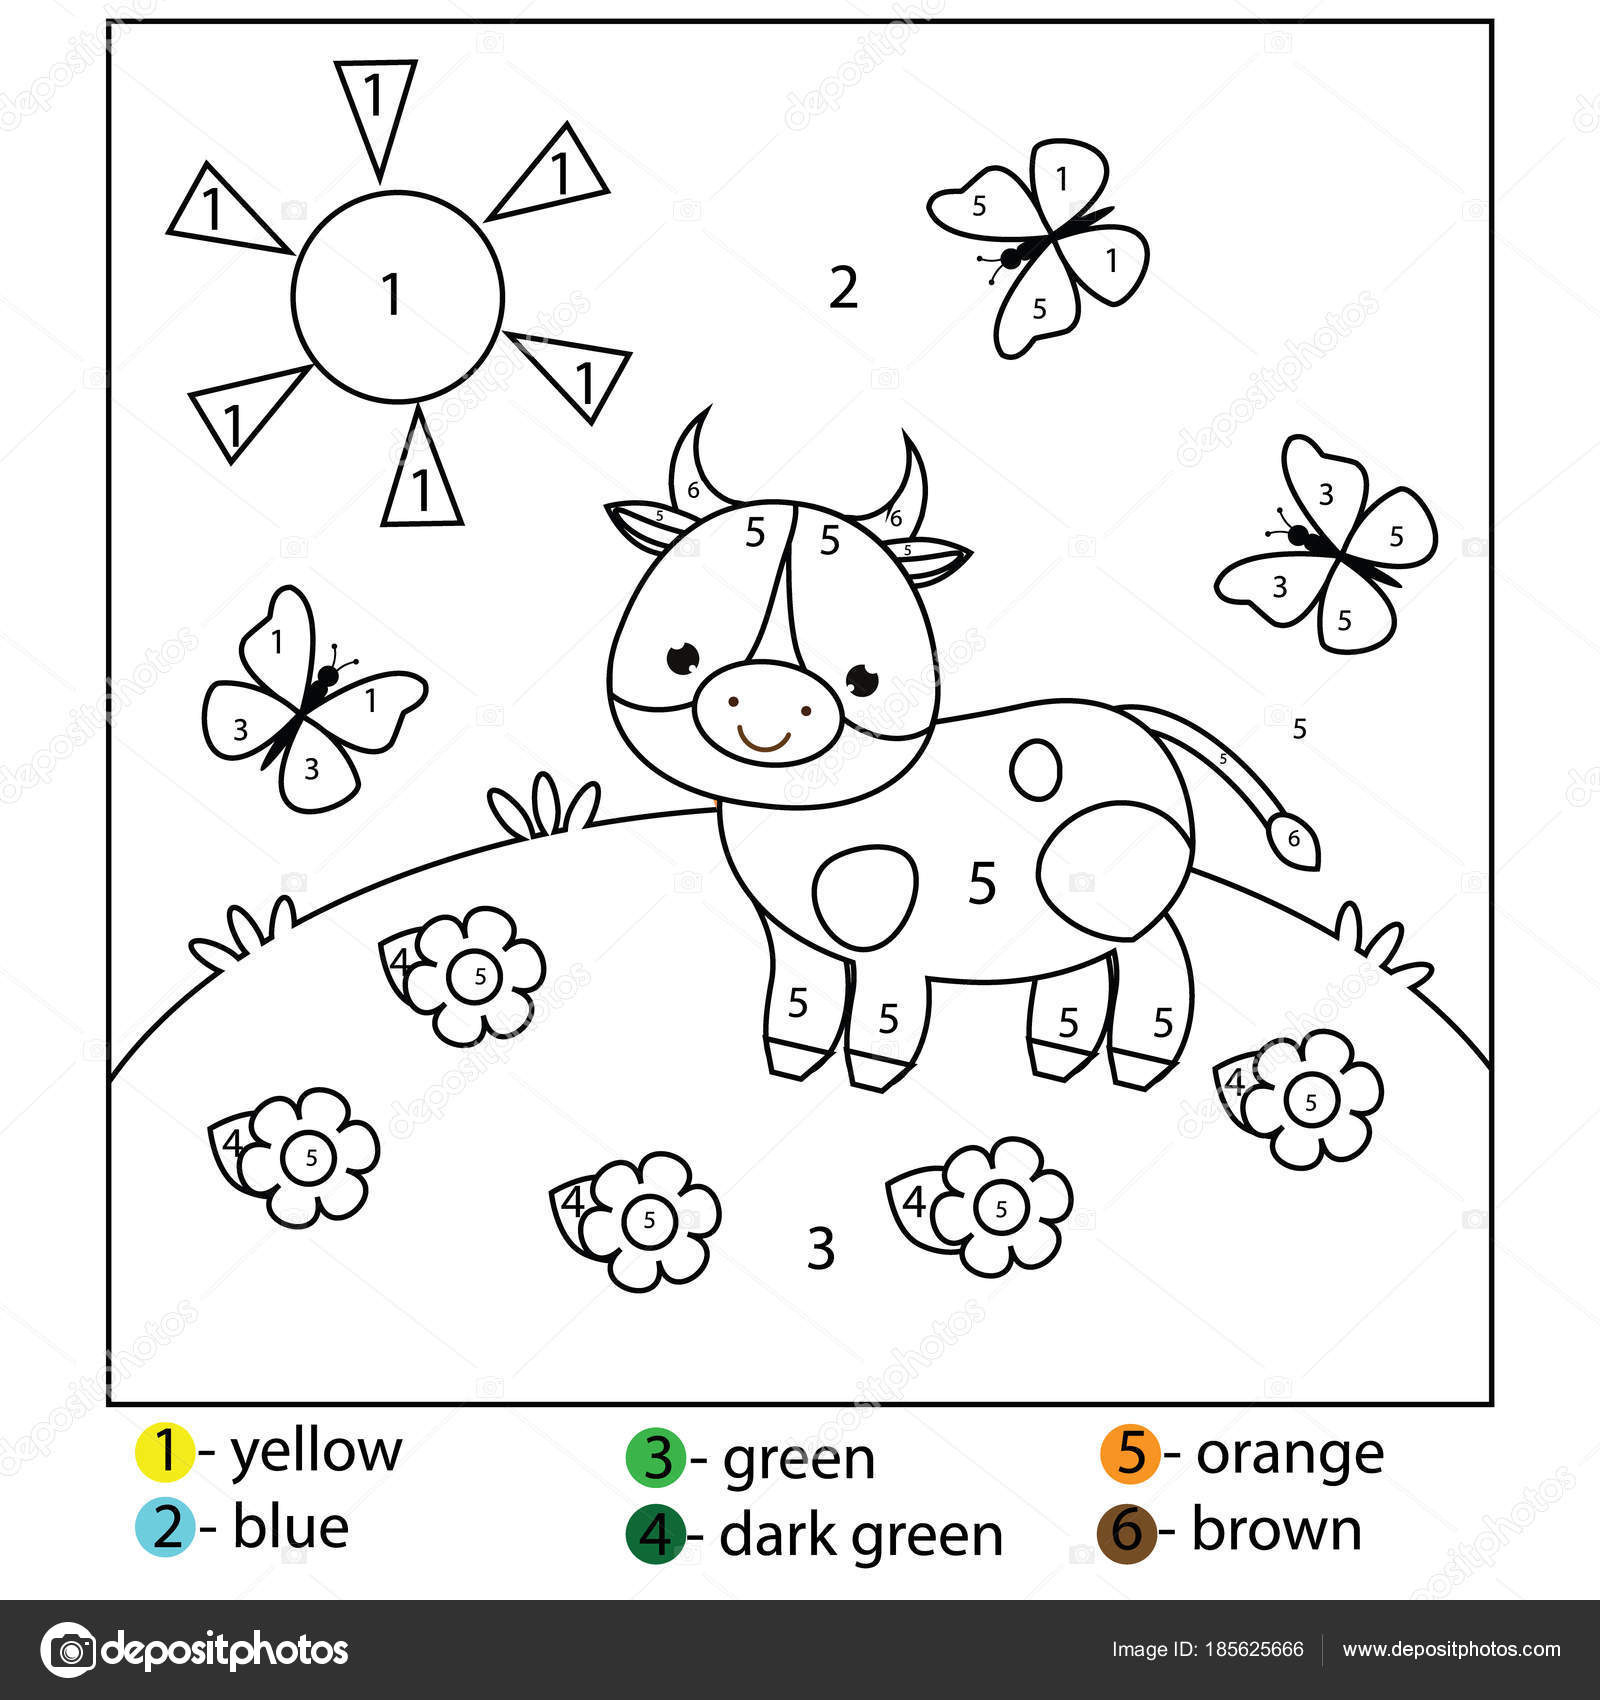 Images For Coloring For Toddlers  Educational Game Kids